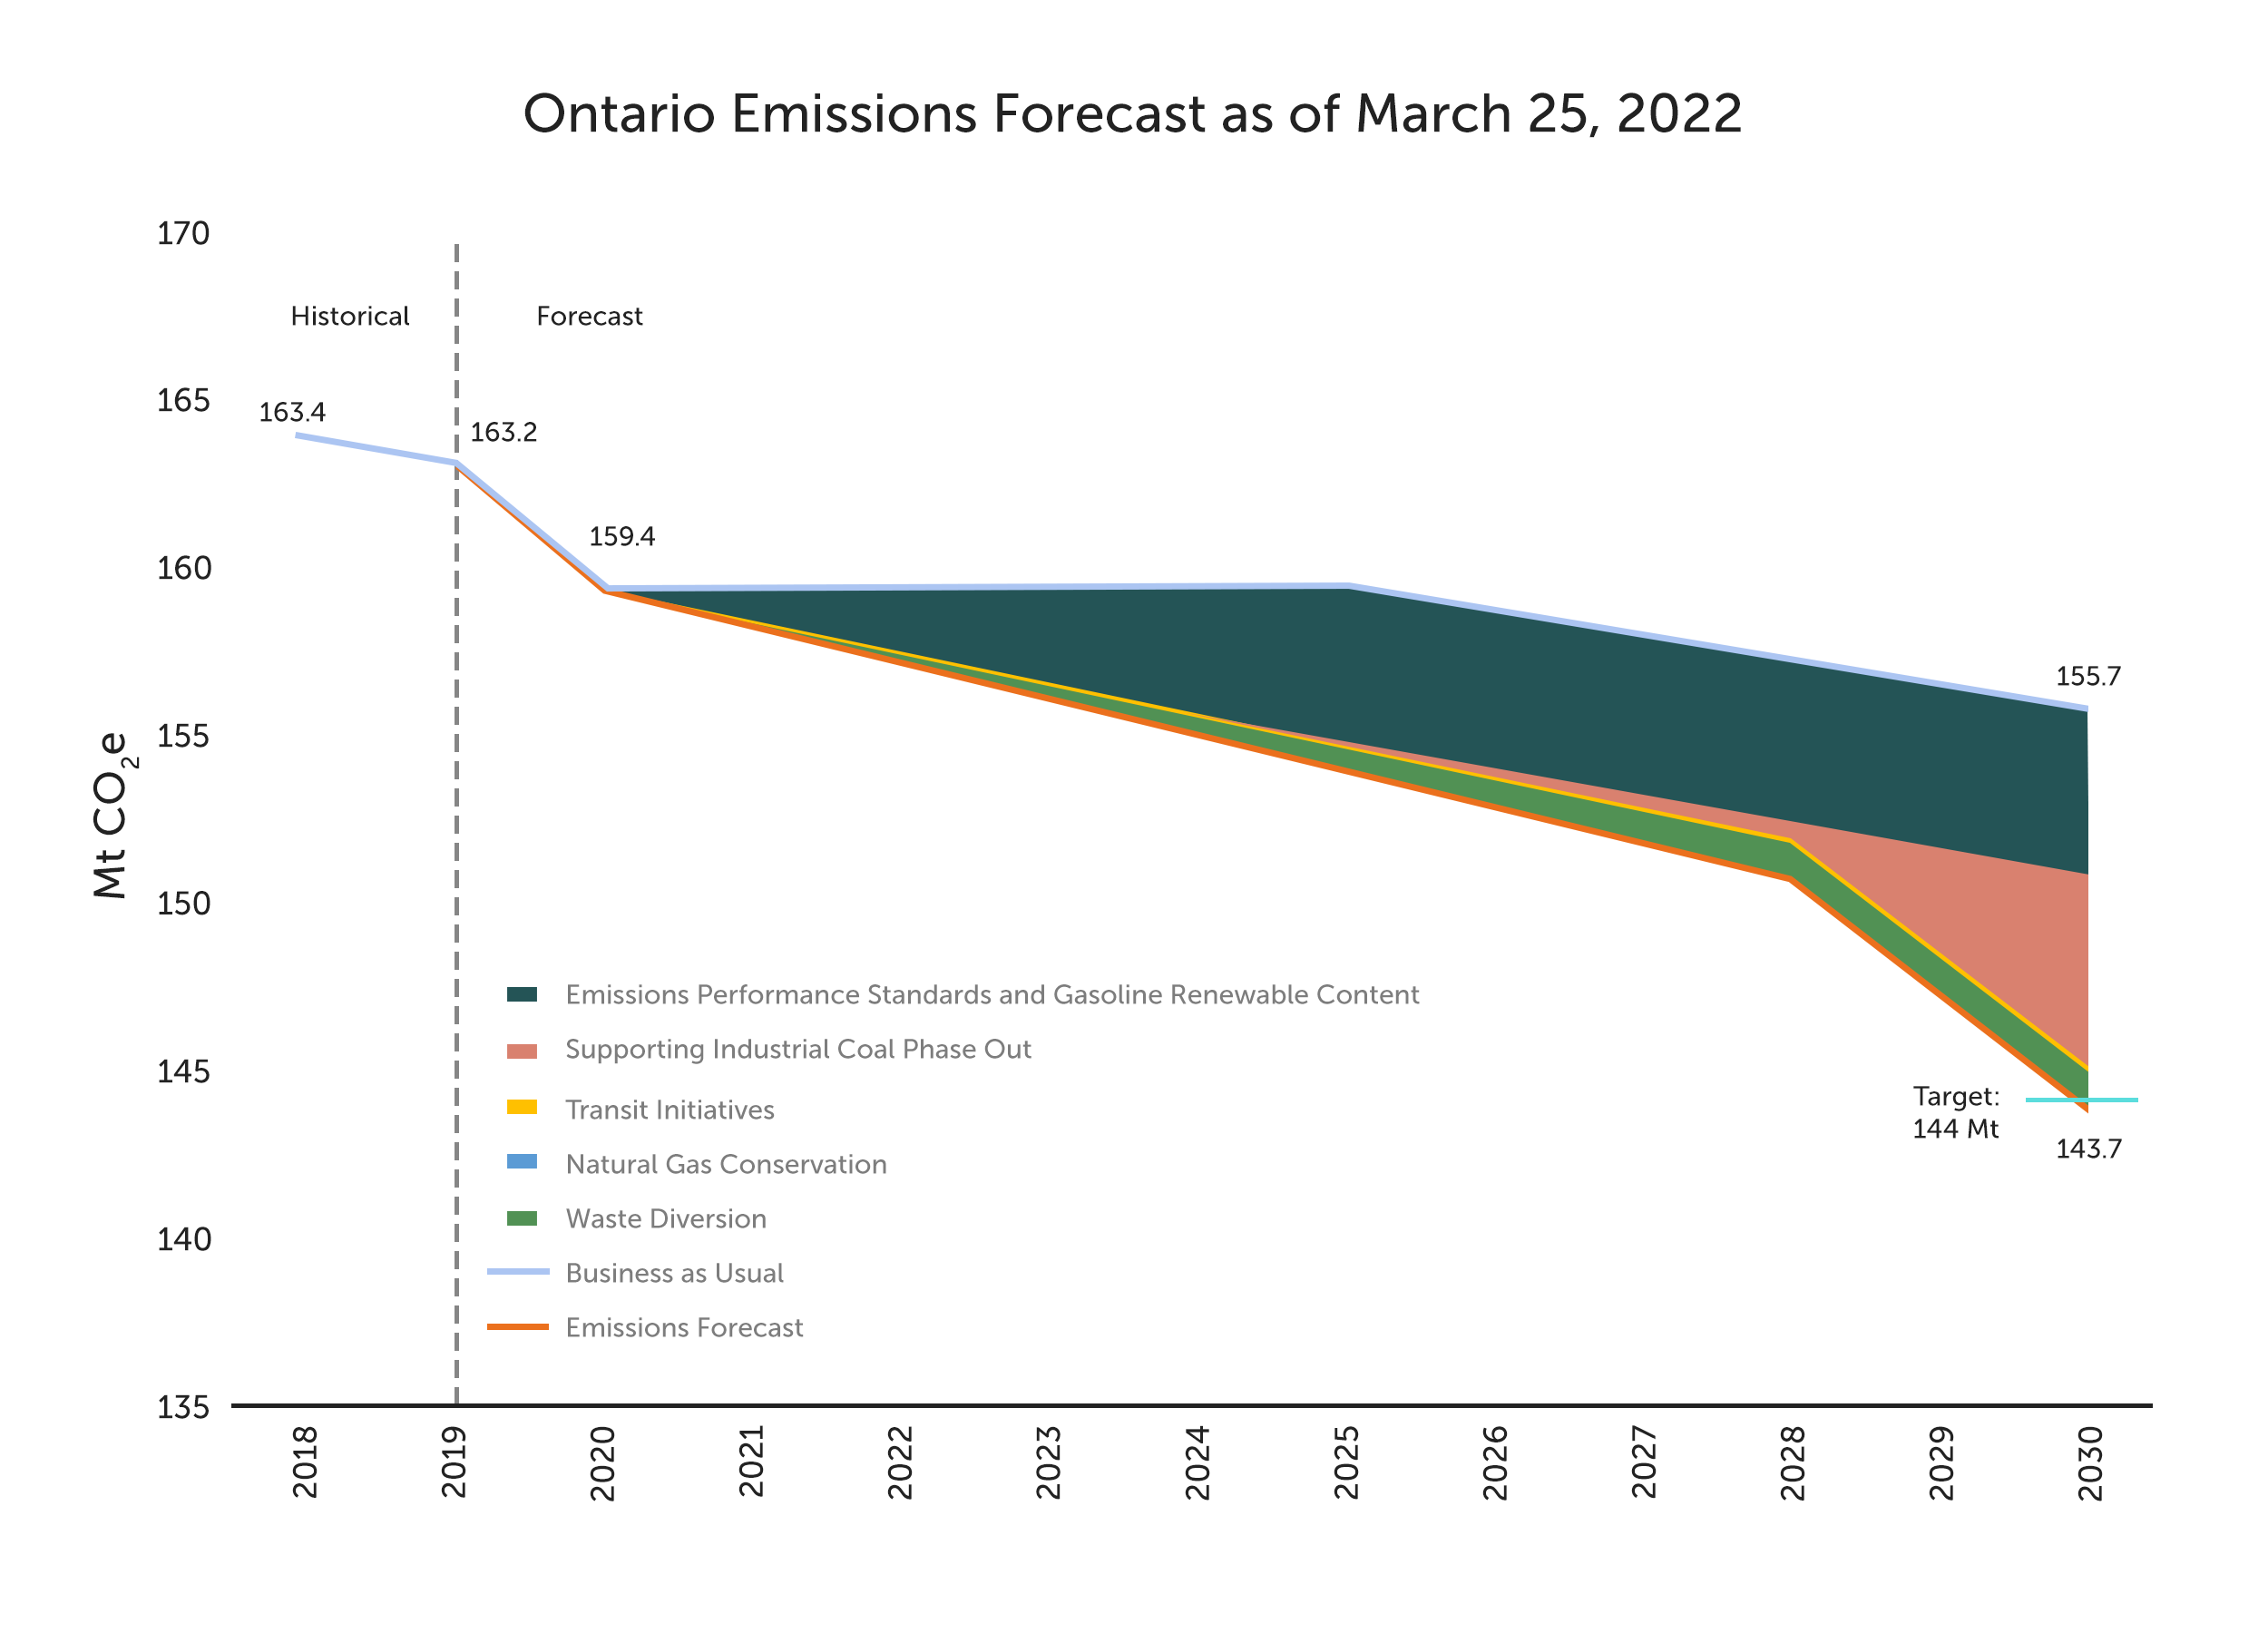 Graph of the Ford government's climate forecast of March 2022